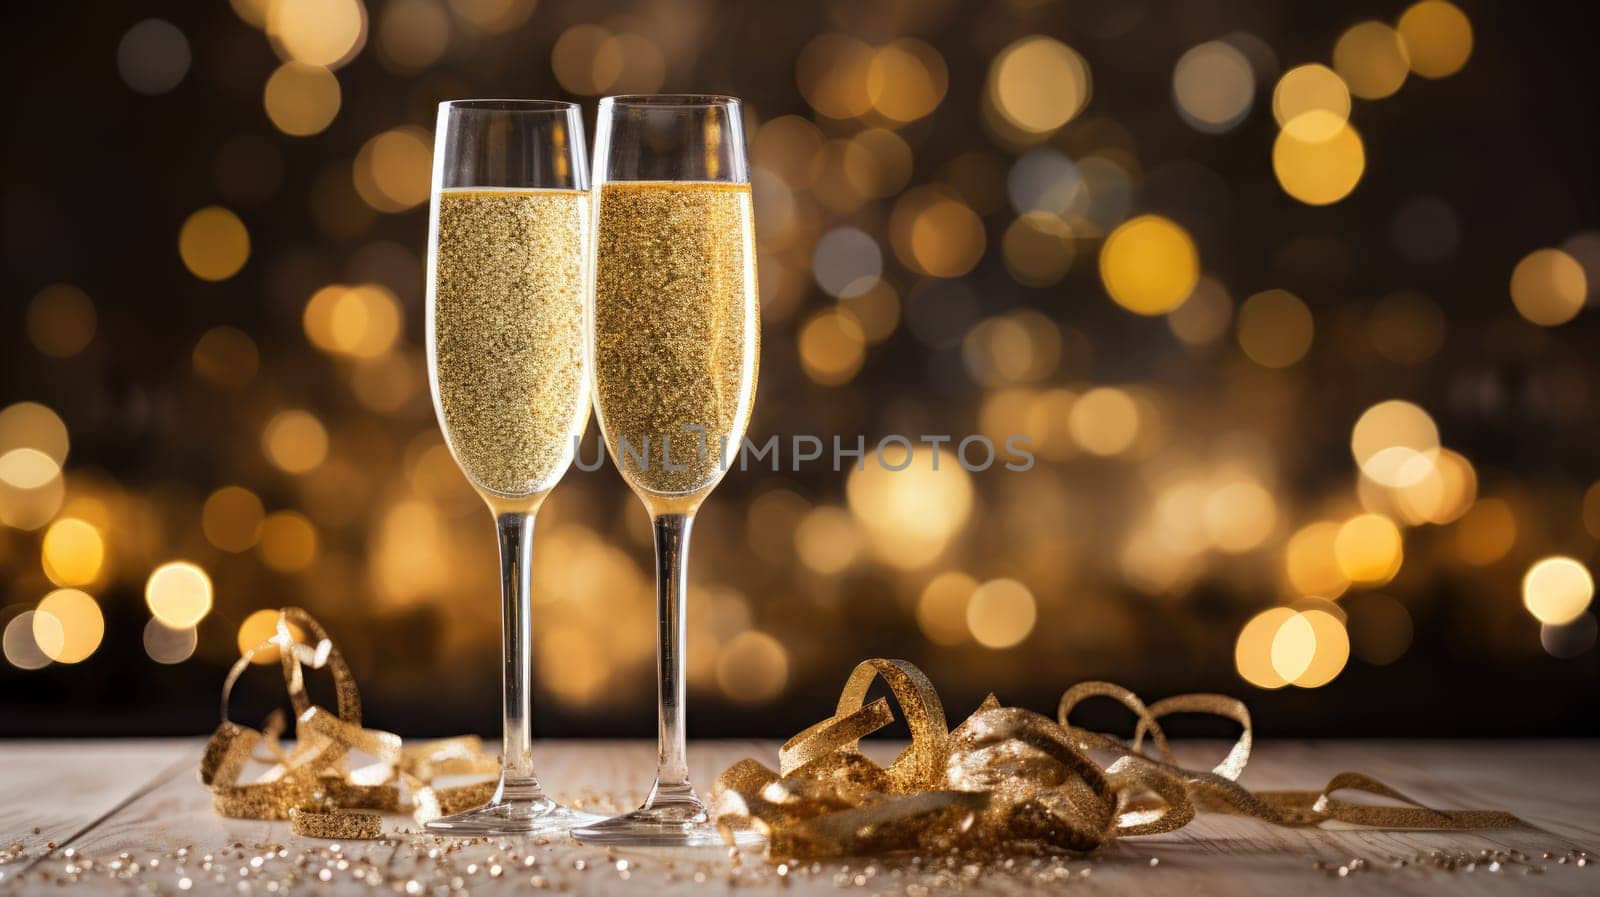 champagne glasses for celebration and party, ai